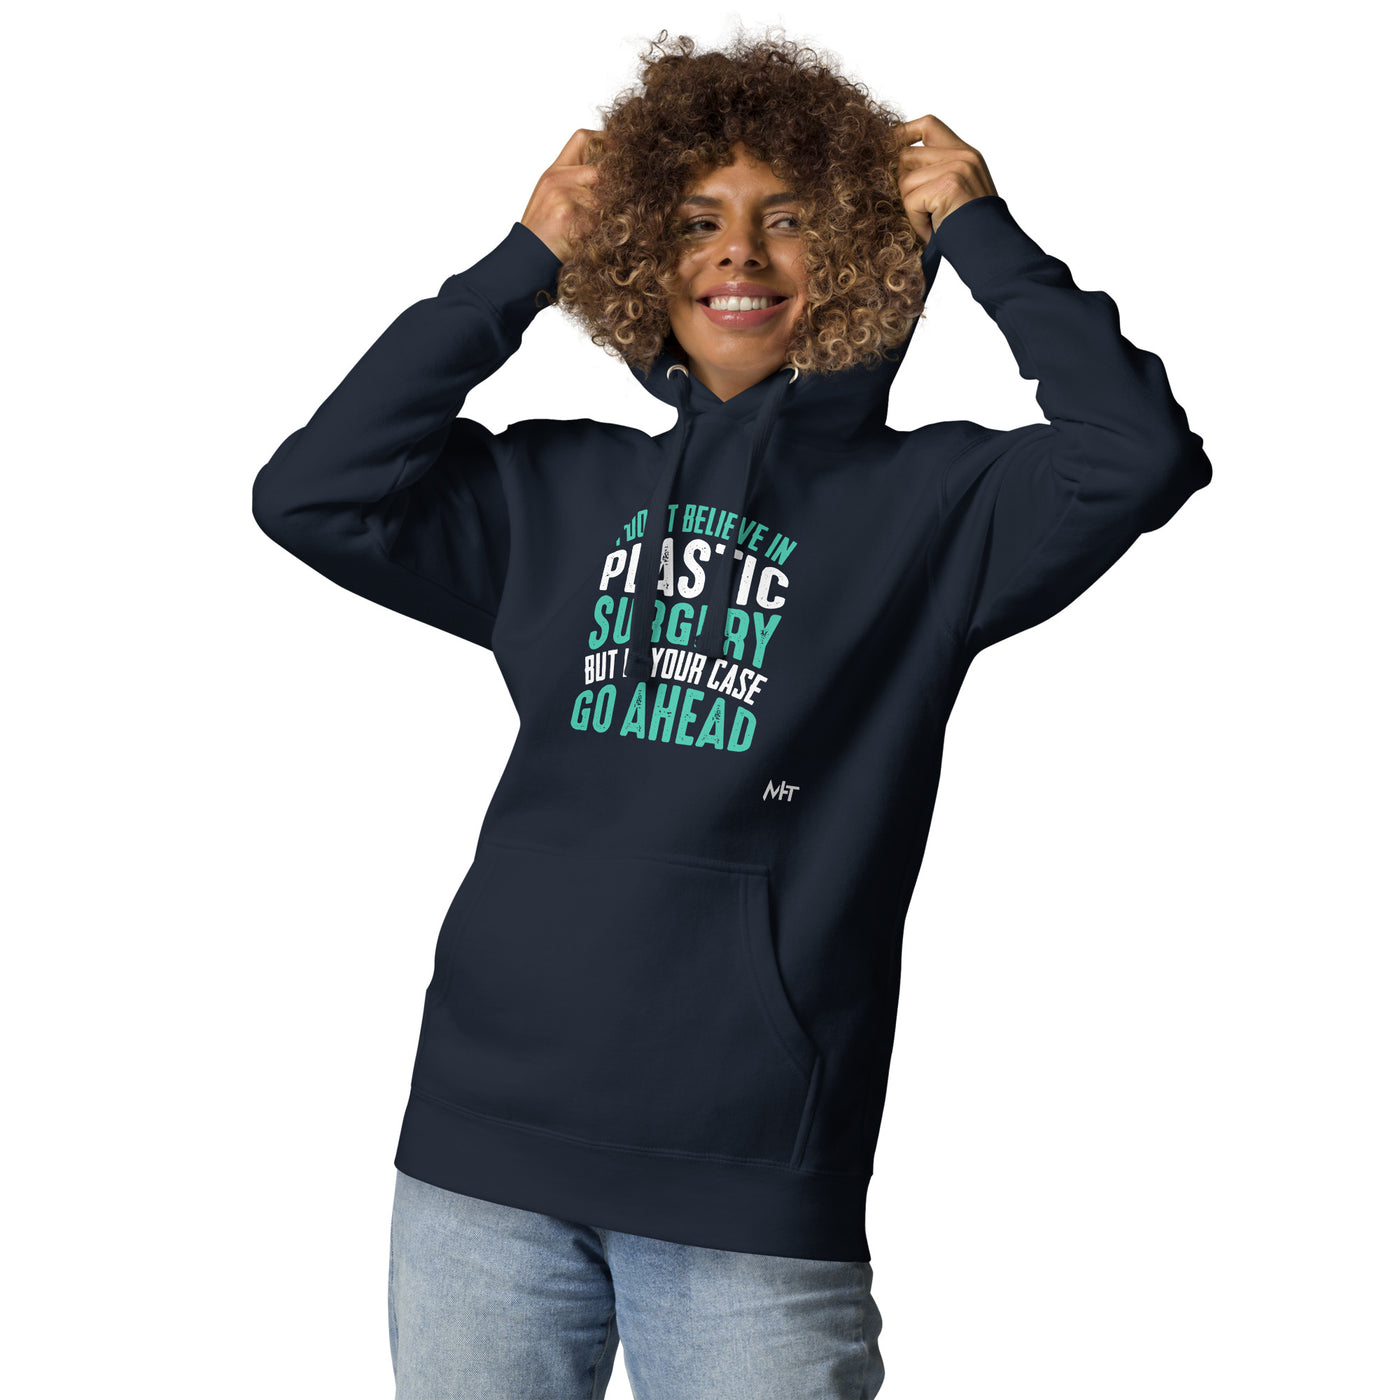 I don't believe in plastic surgery - Unisex Hoodie